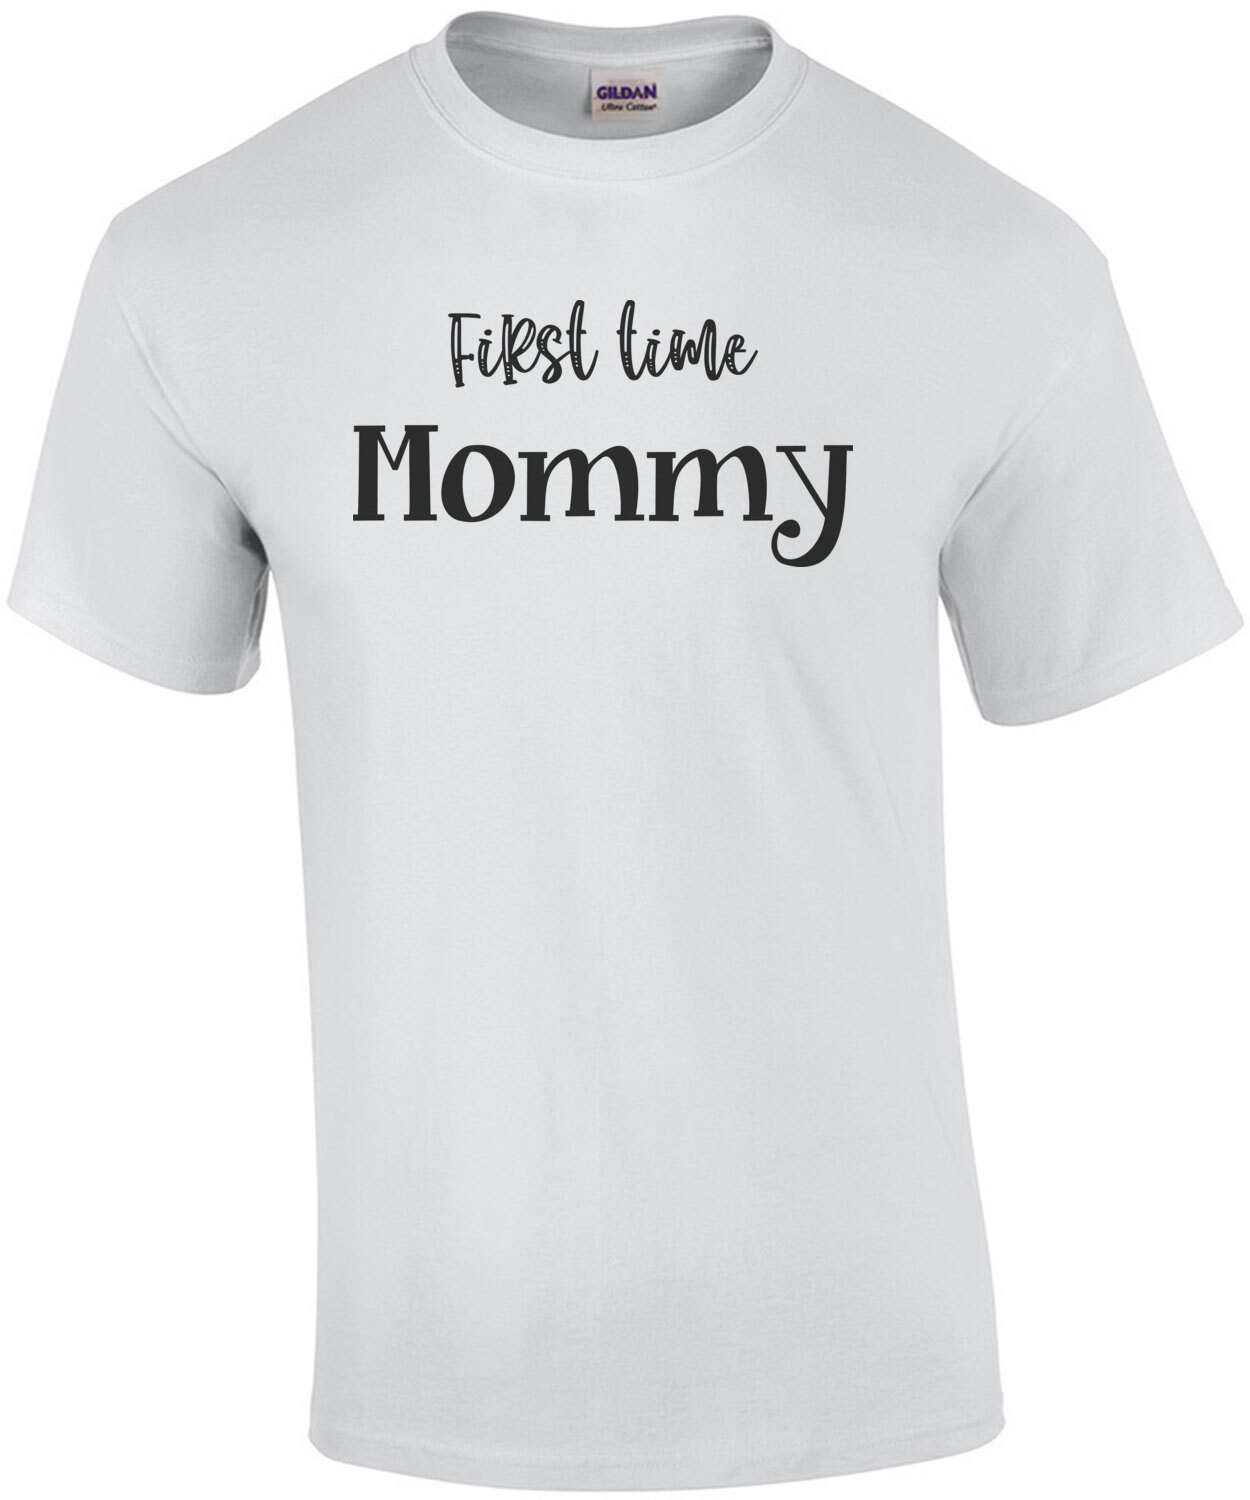 First Time Mommy T-Shirt